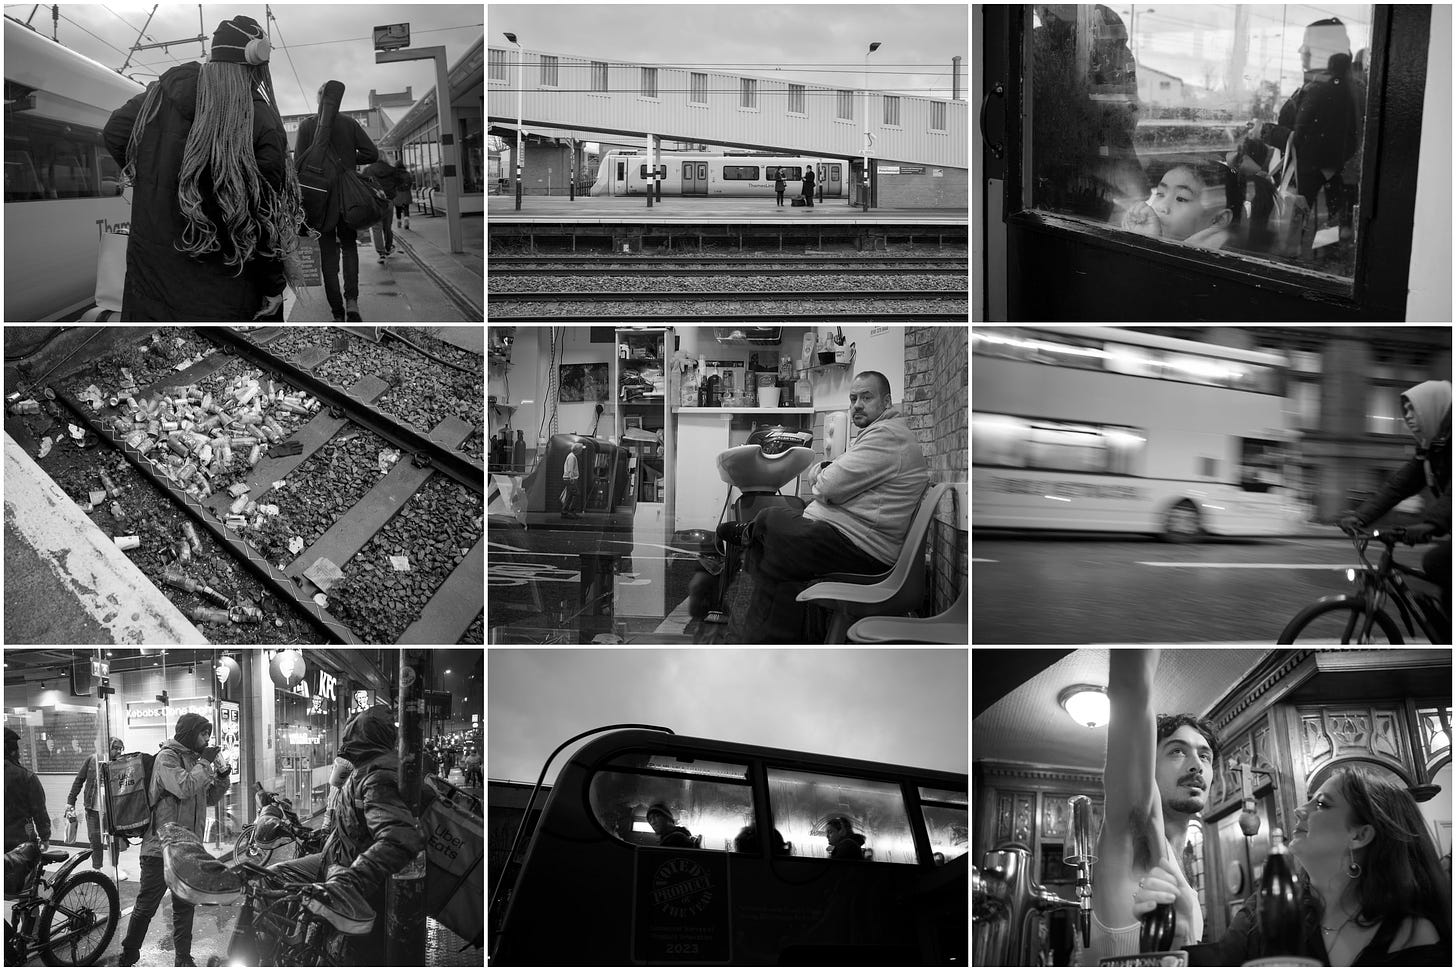 A montage of nine images taken on the way to and in Manchester. Mostly candid street scenes.